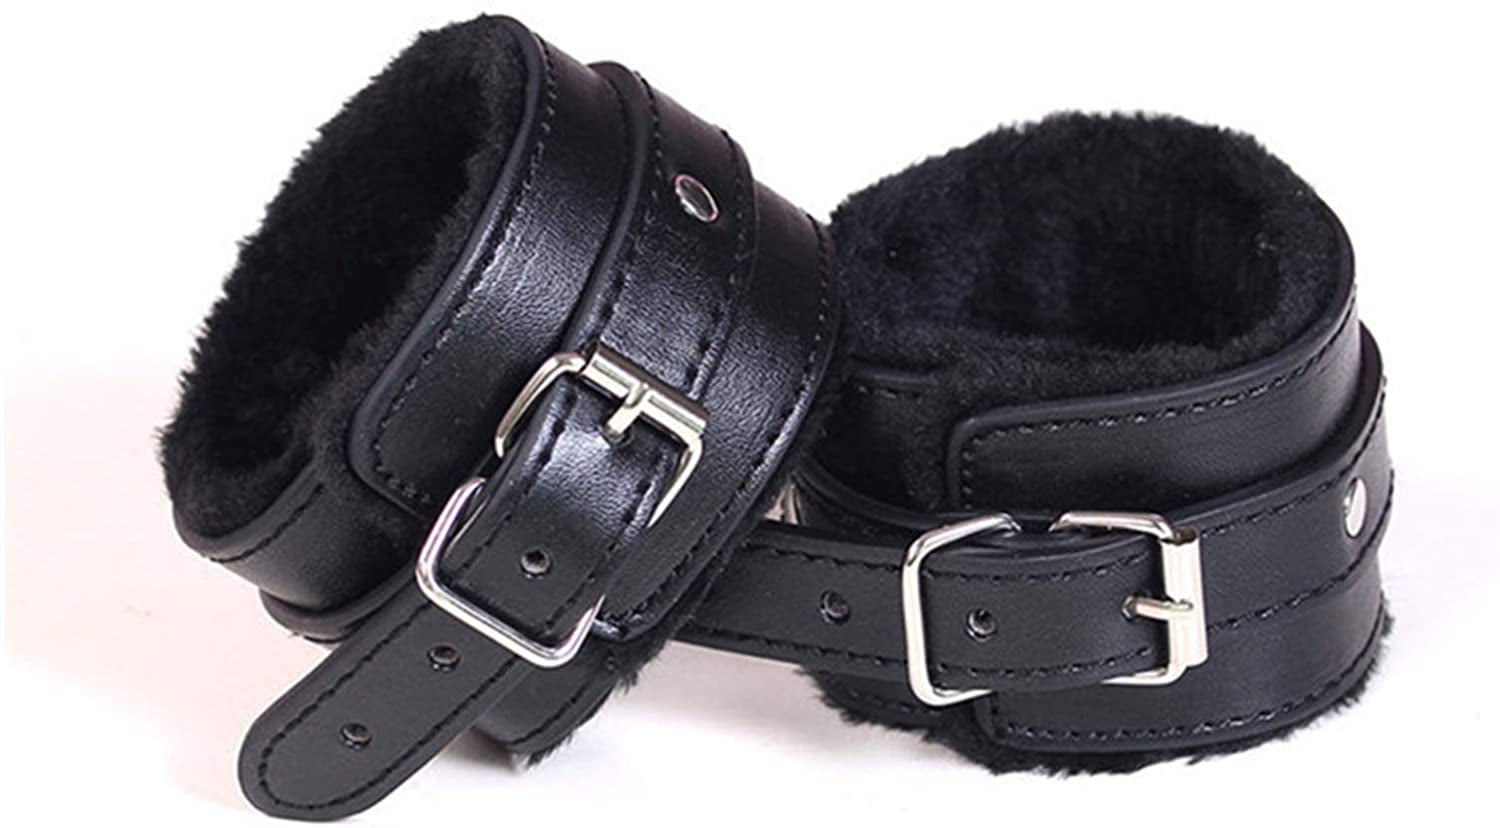 Black A Punk Fluffy Wrist Leather Handcuffs Bracelet Soft Plush Lining Wrist Handcuffs Bracelet Leg Cuffs Role Play Exercise Bands Leash Detachable for Home Yoga Gyms Party Cosplay Jewelry 